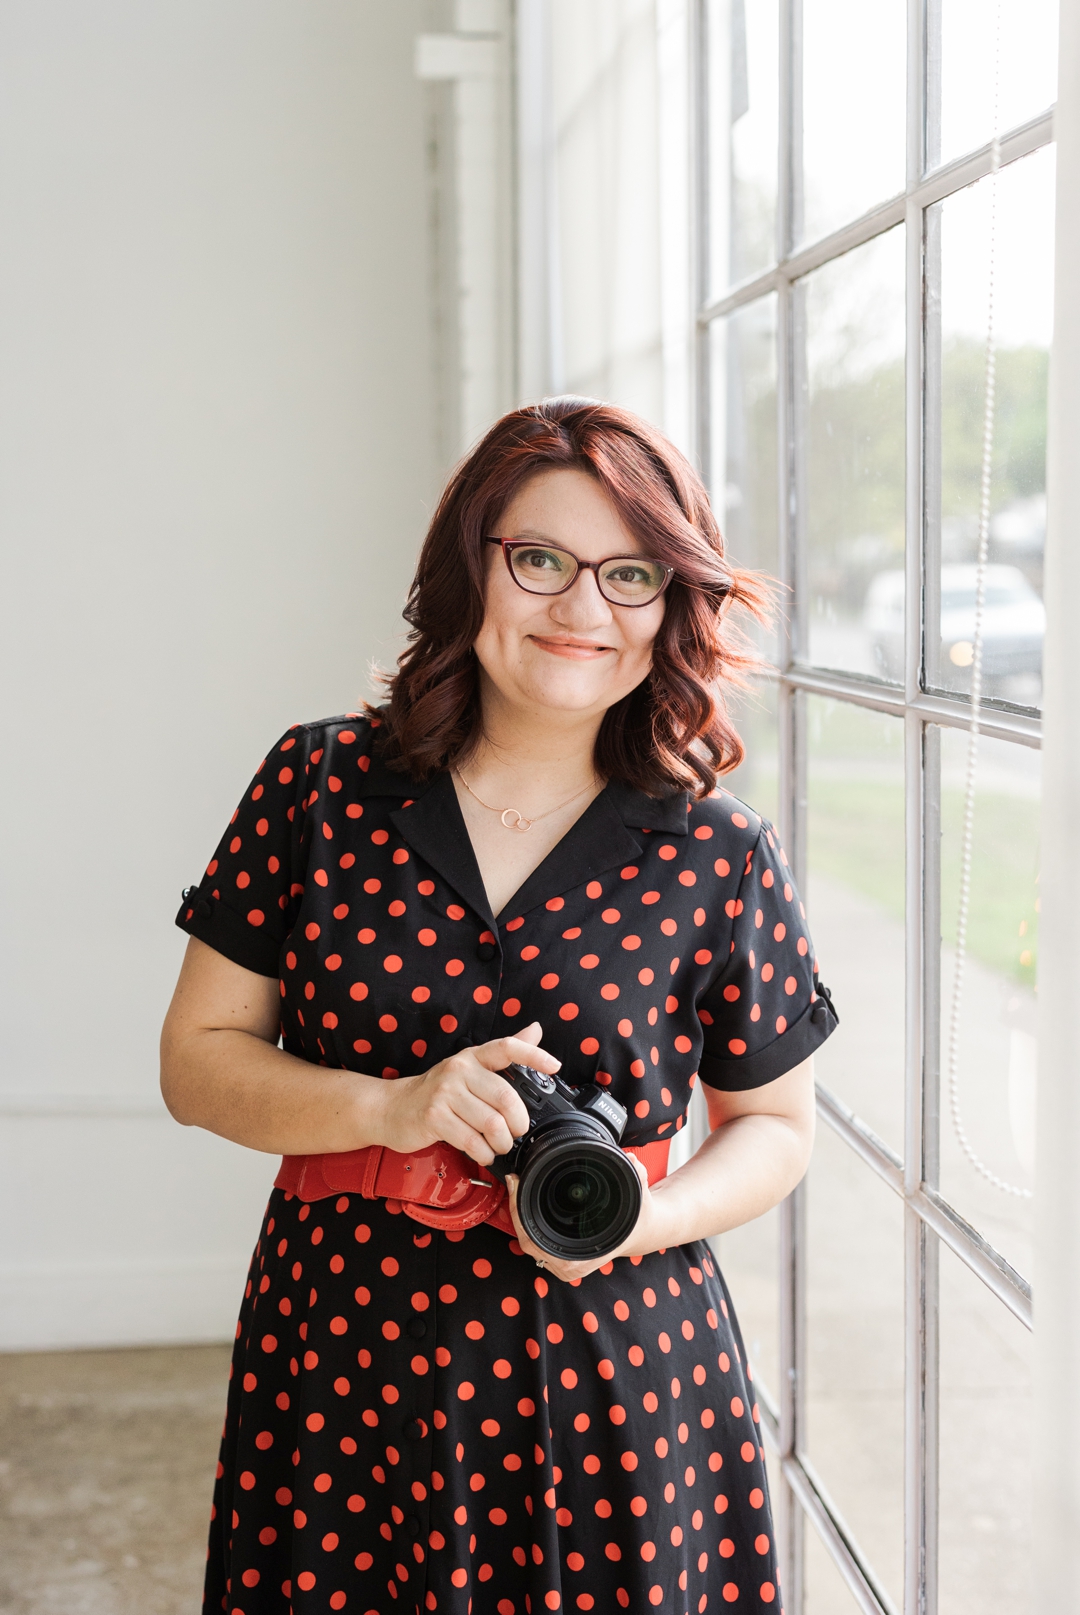 Fort Worth Headshot Photographer; Latina woman wearing a black and red polka dotted dress with a red belt and holding a Nikon DSLR camera next to a window